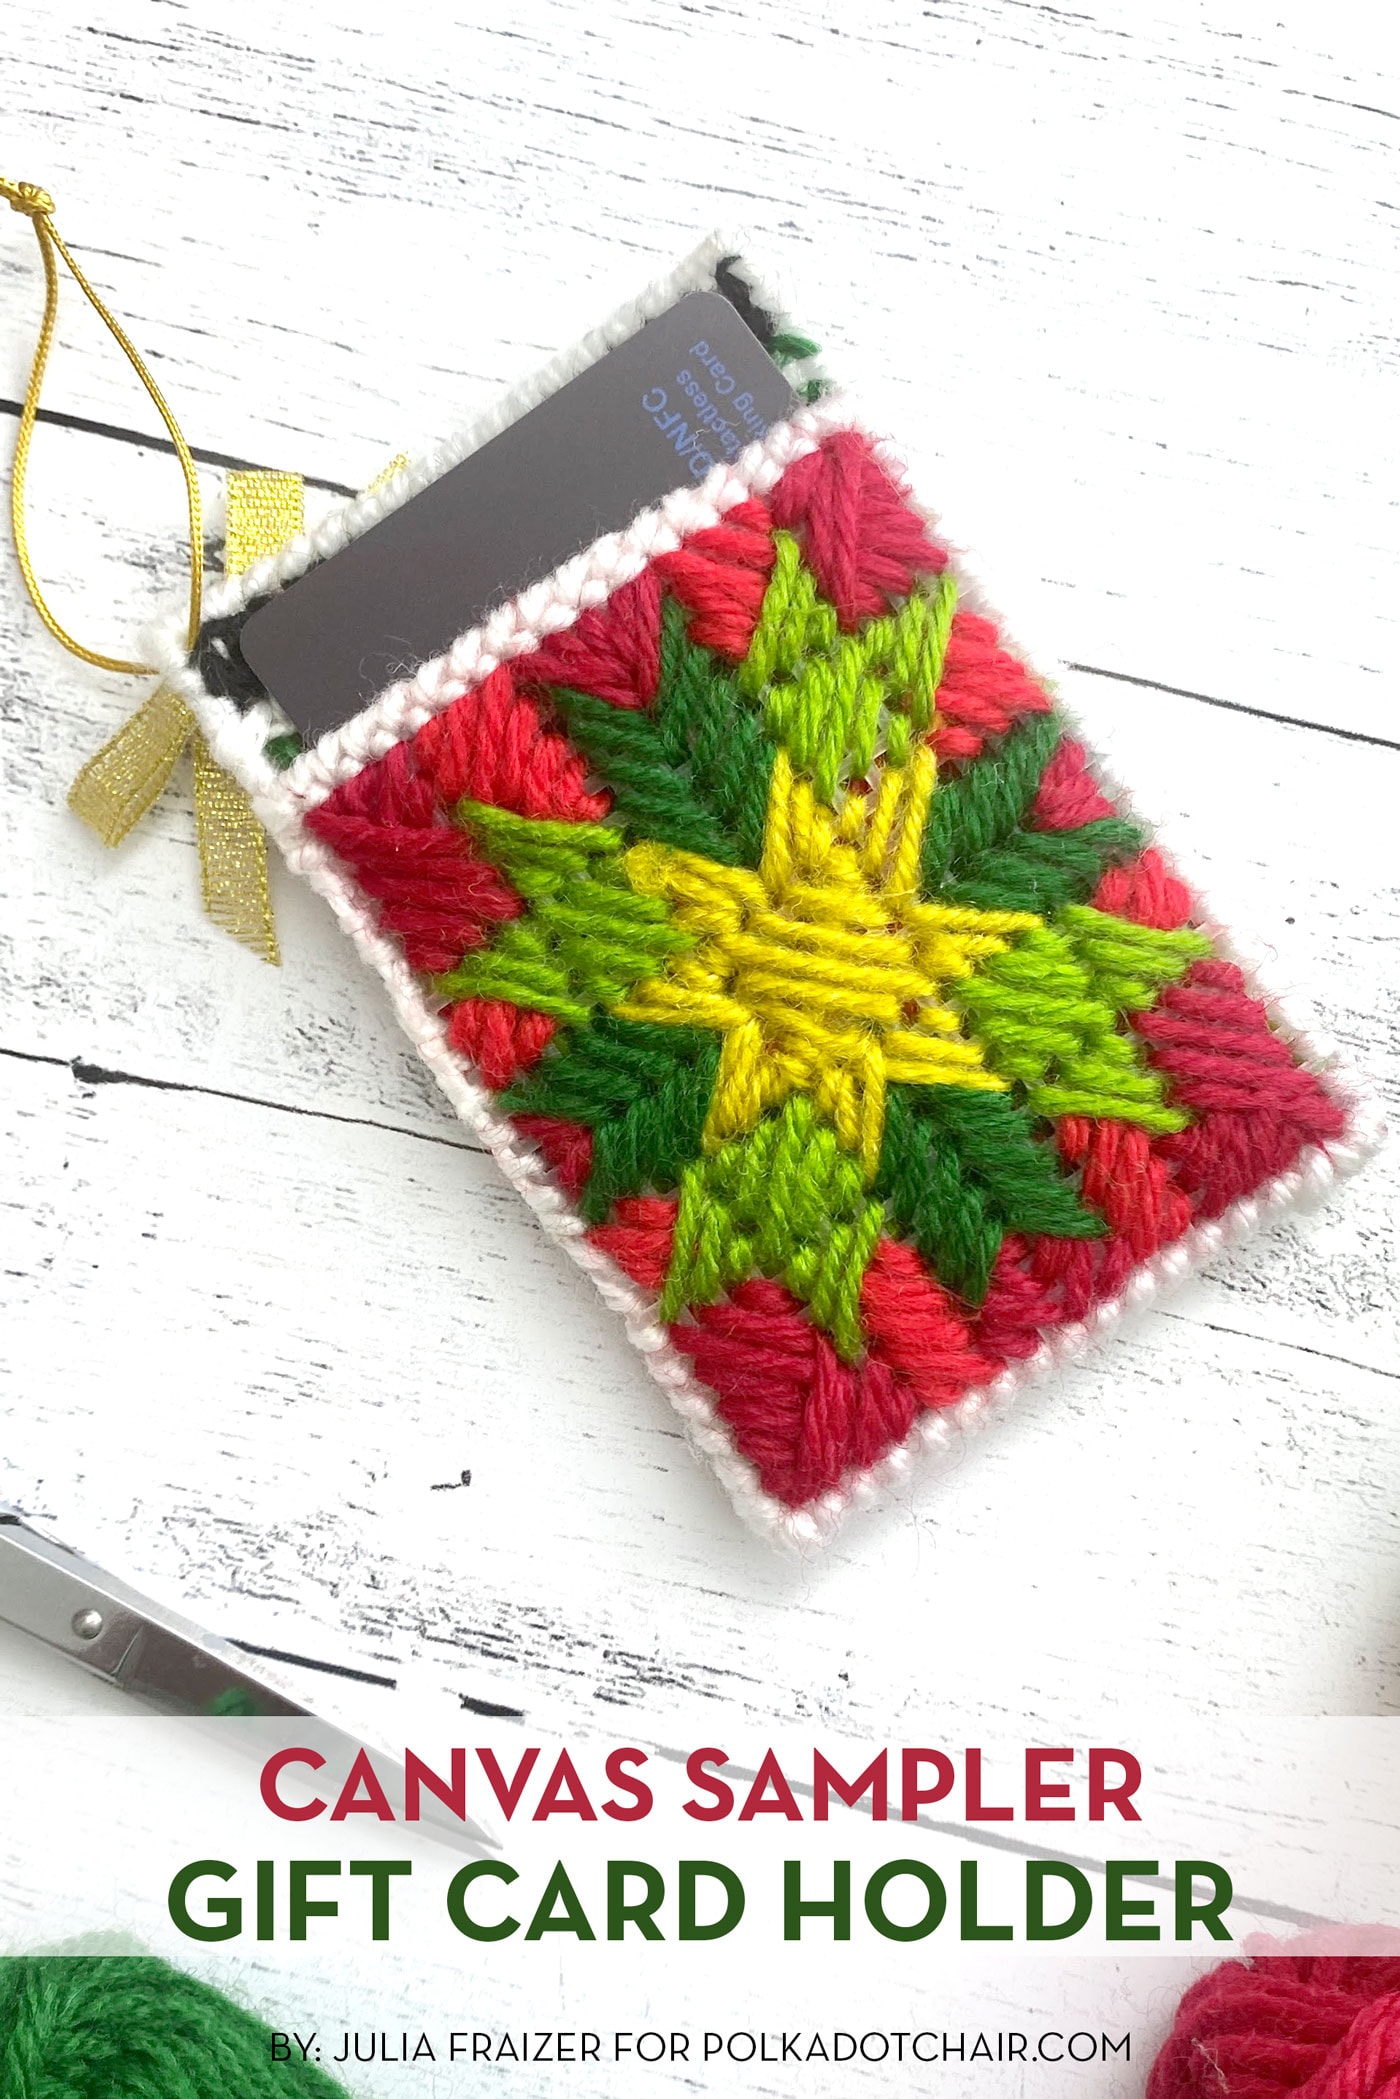 red, green and yellow plastic canvas gift card holder on white wood table